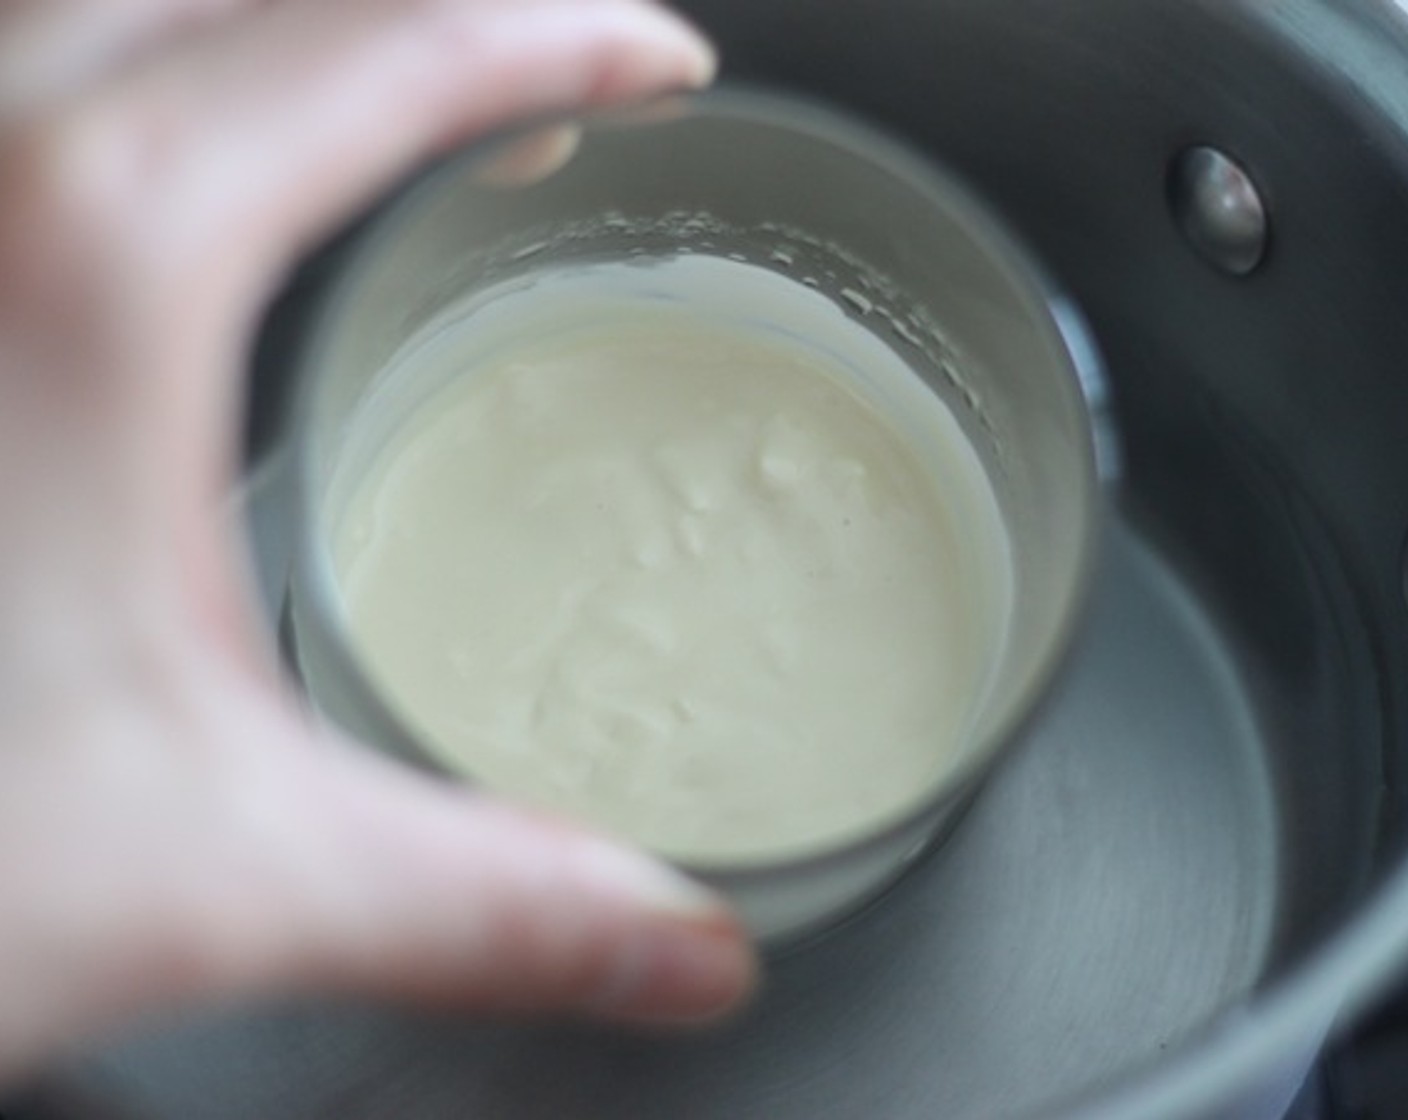 step 17 Prepare White Chocolate (3 Tbsp) and a piping bag. Then set a half-fill saucepan with water and bring to a simmer. Place a cup on top, making sure it doesn’t touch water (or it will overheat). Stir with a metal spoon until melted.